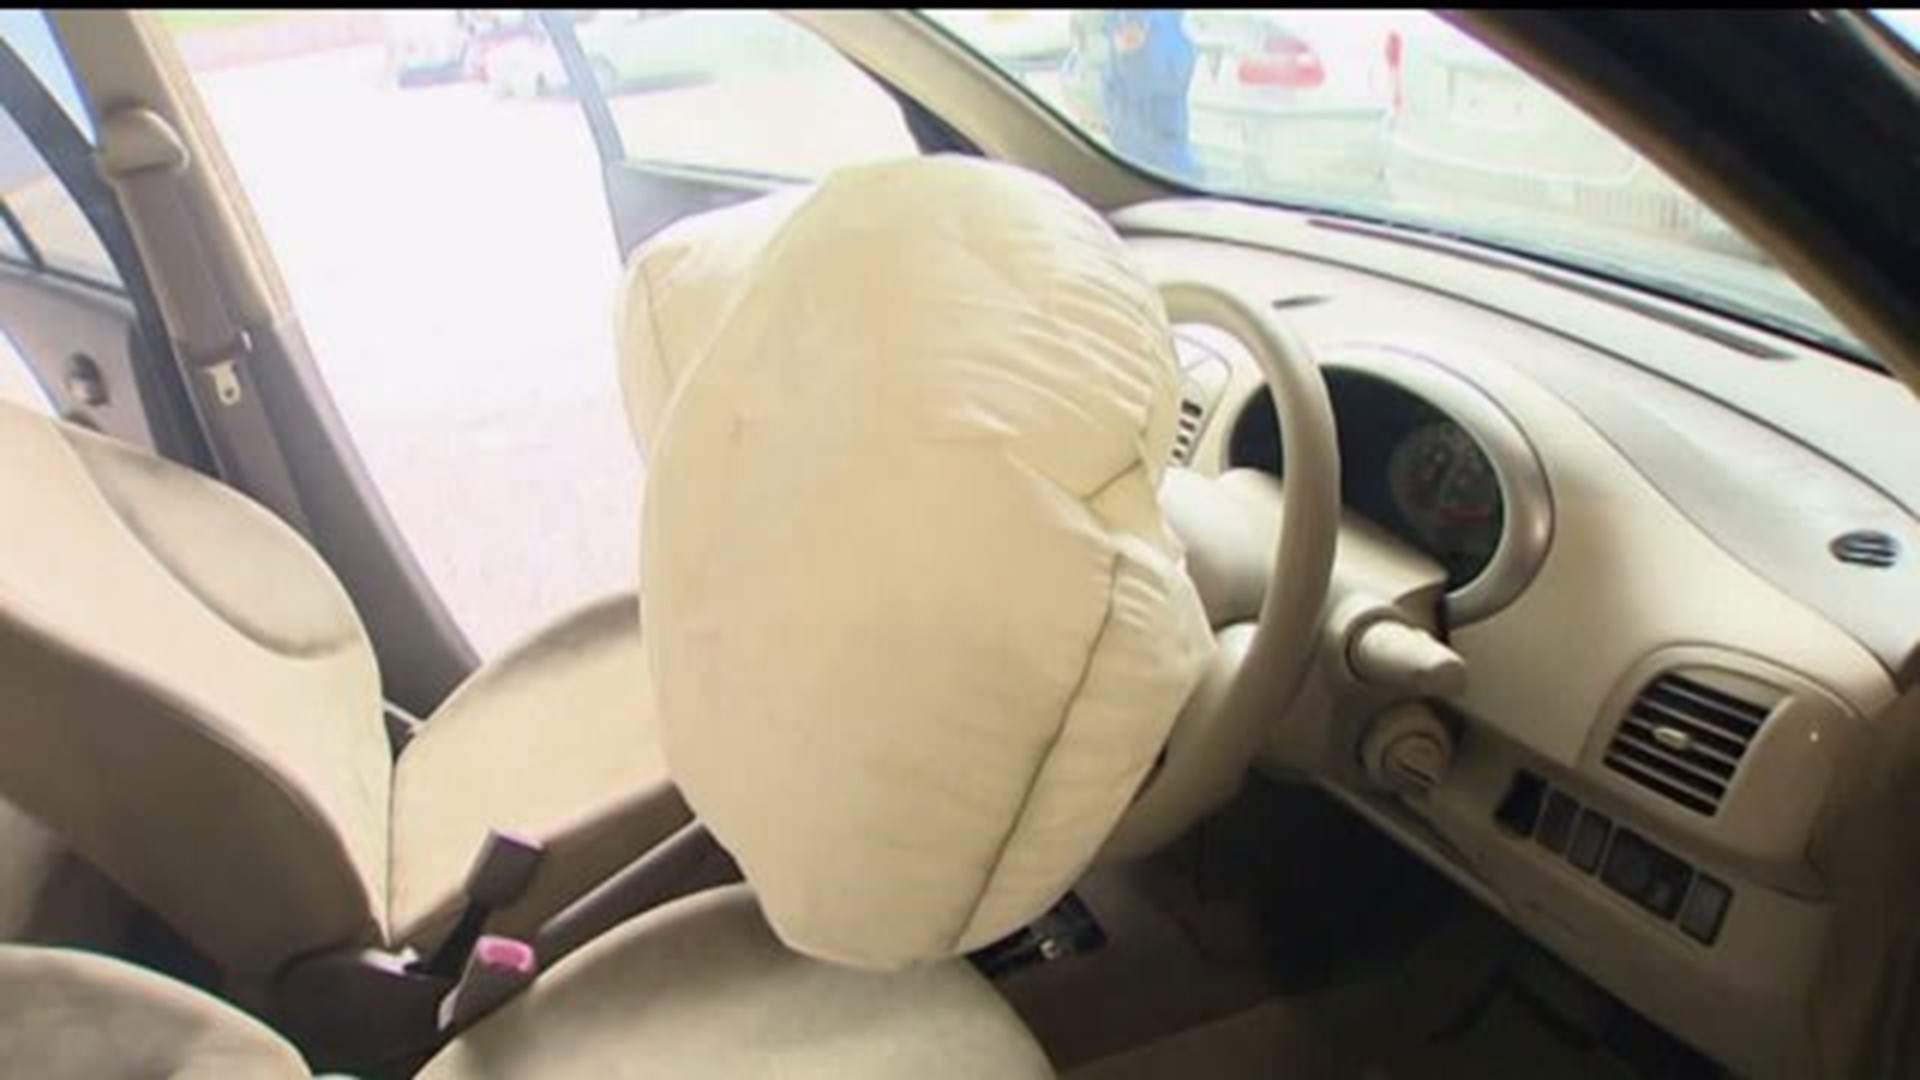 Takata airbag recall expanded